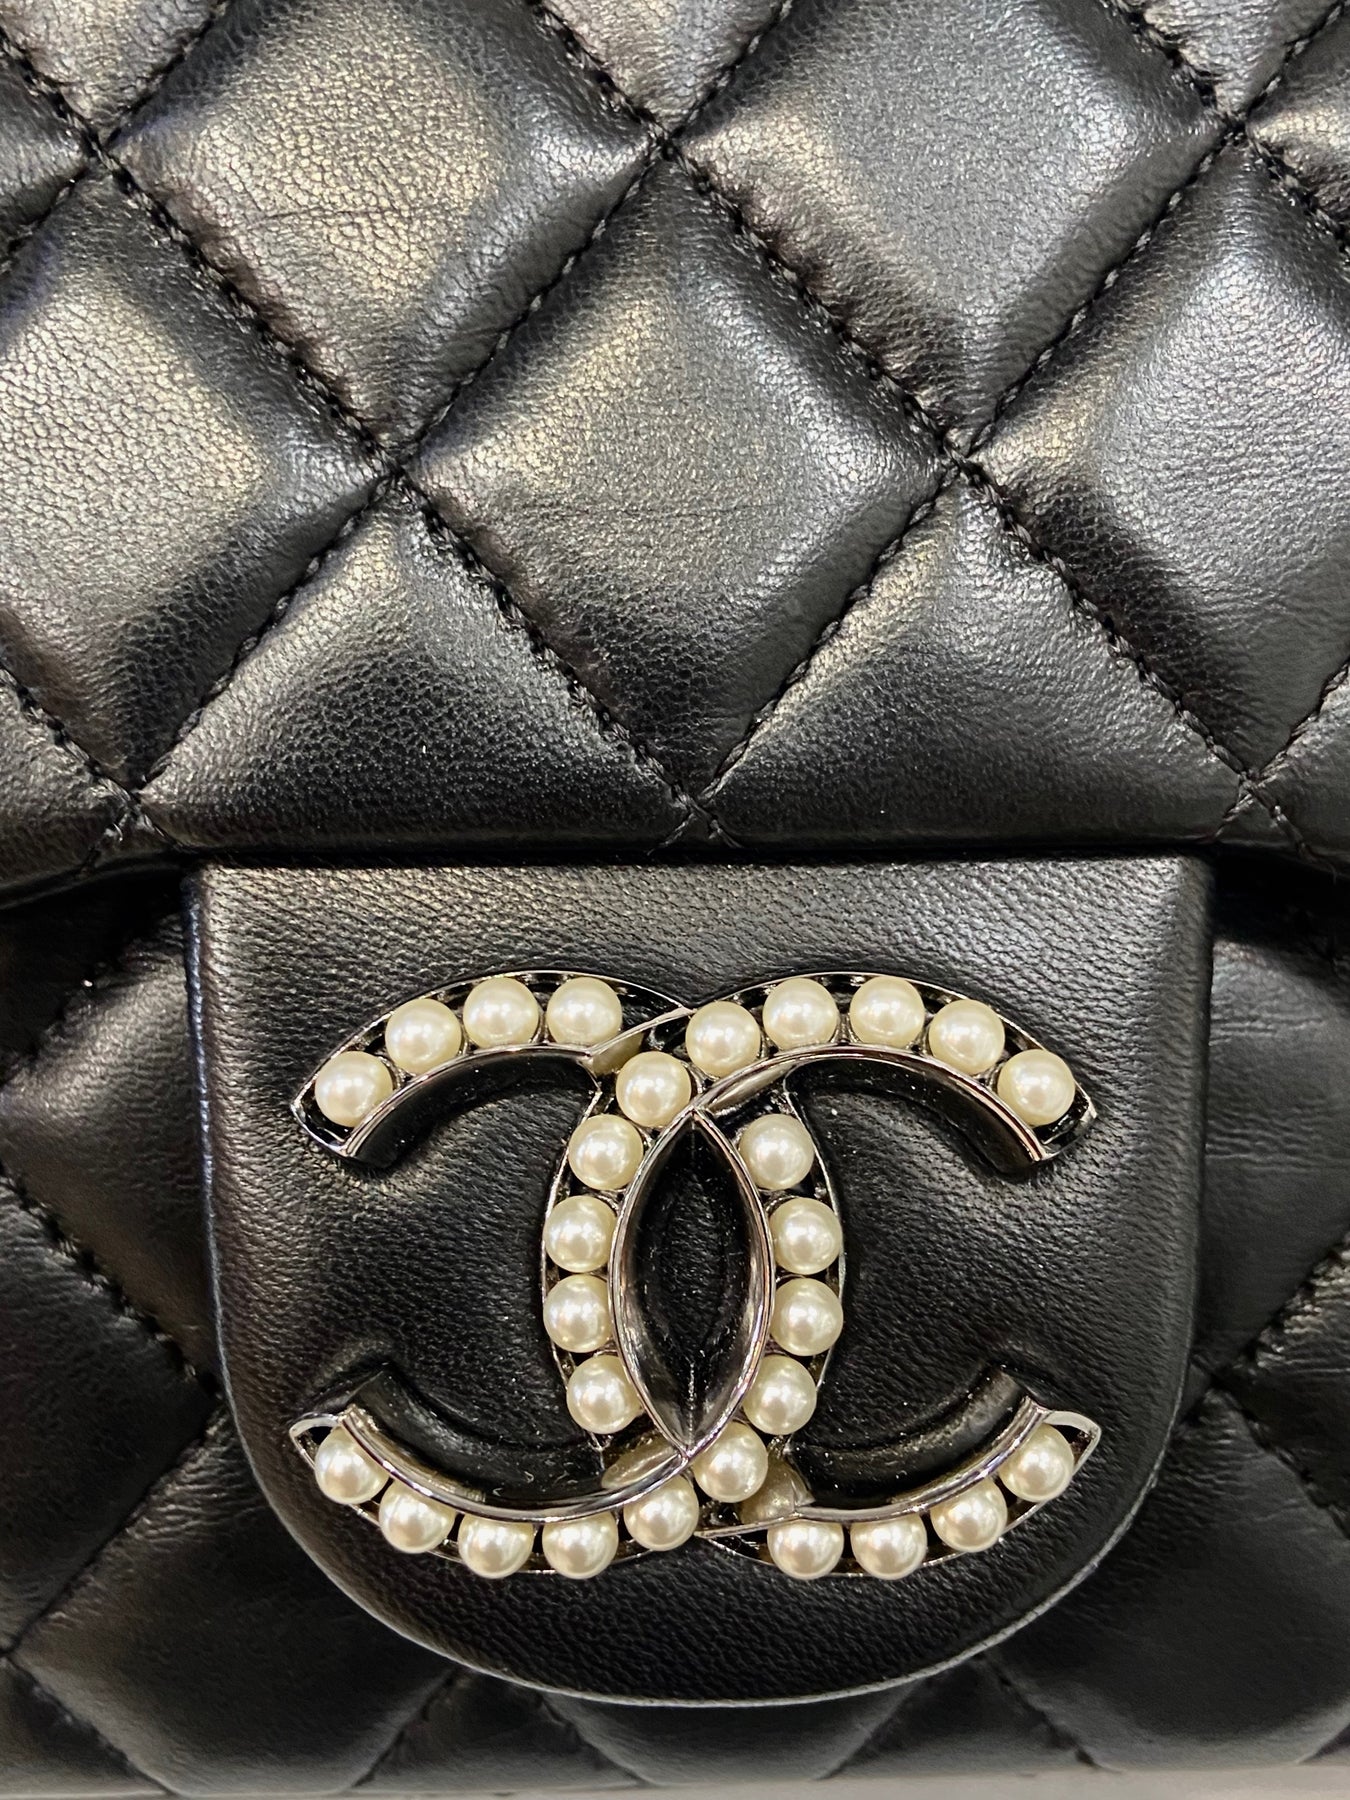 Pristine 19S Chanel Chic Pearls Quilted Flap Bag Black GHW